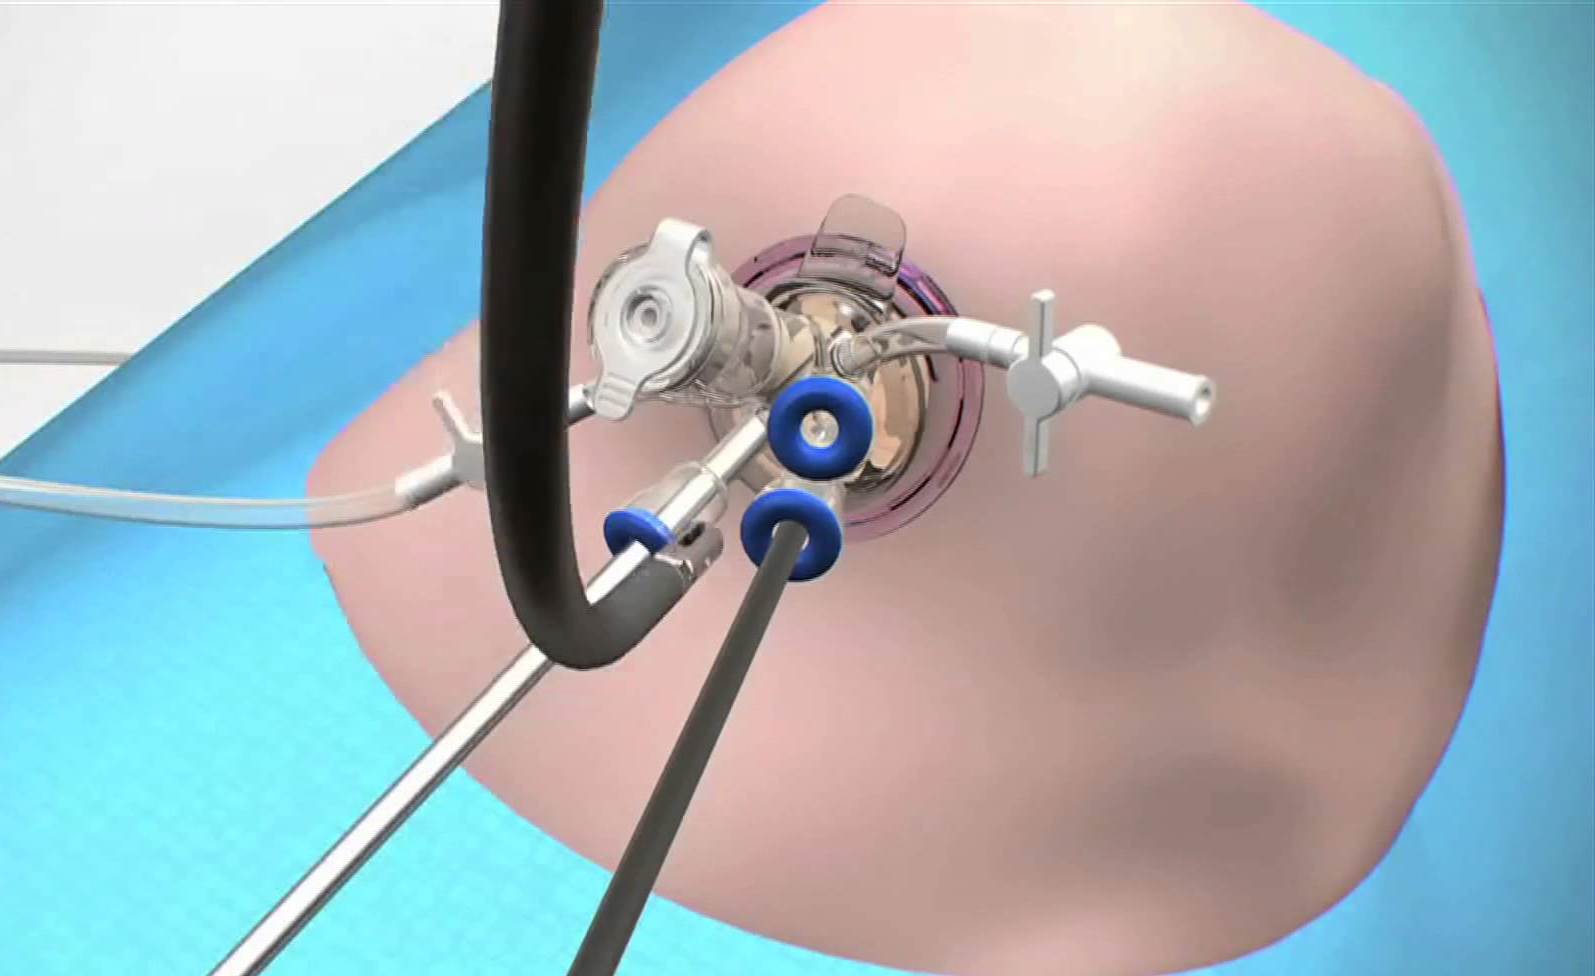 Laparoscopy in gynecology: nuances you need to know about